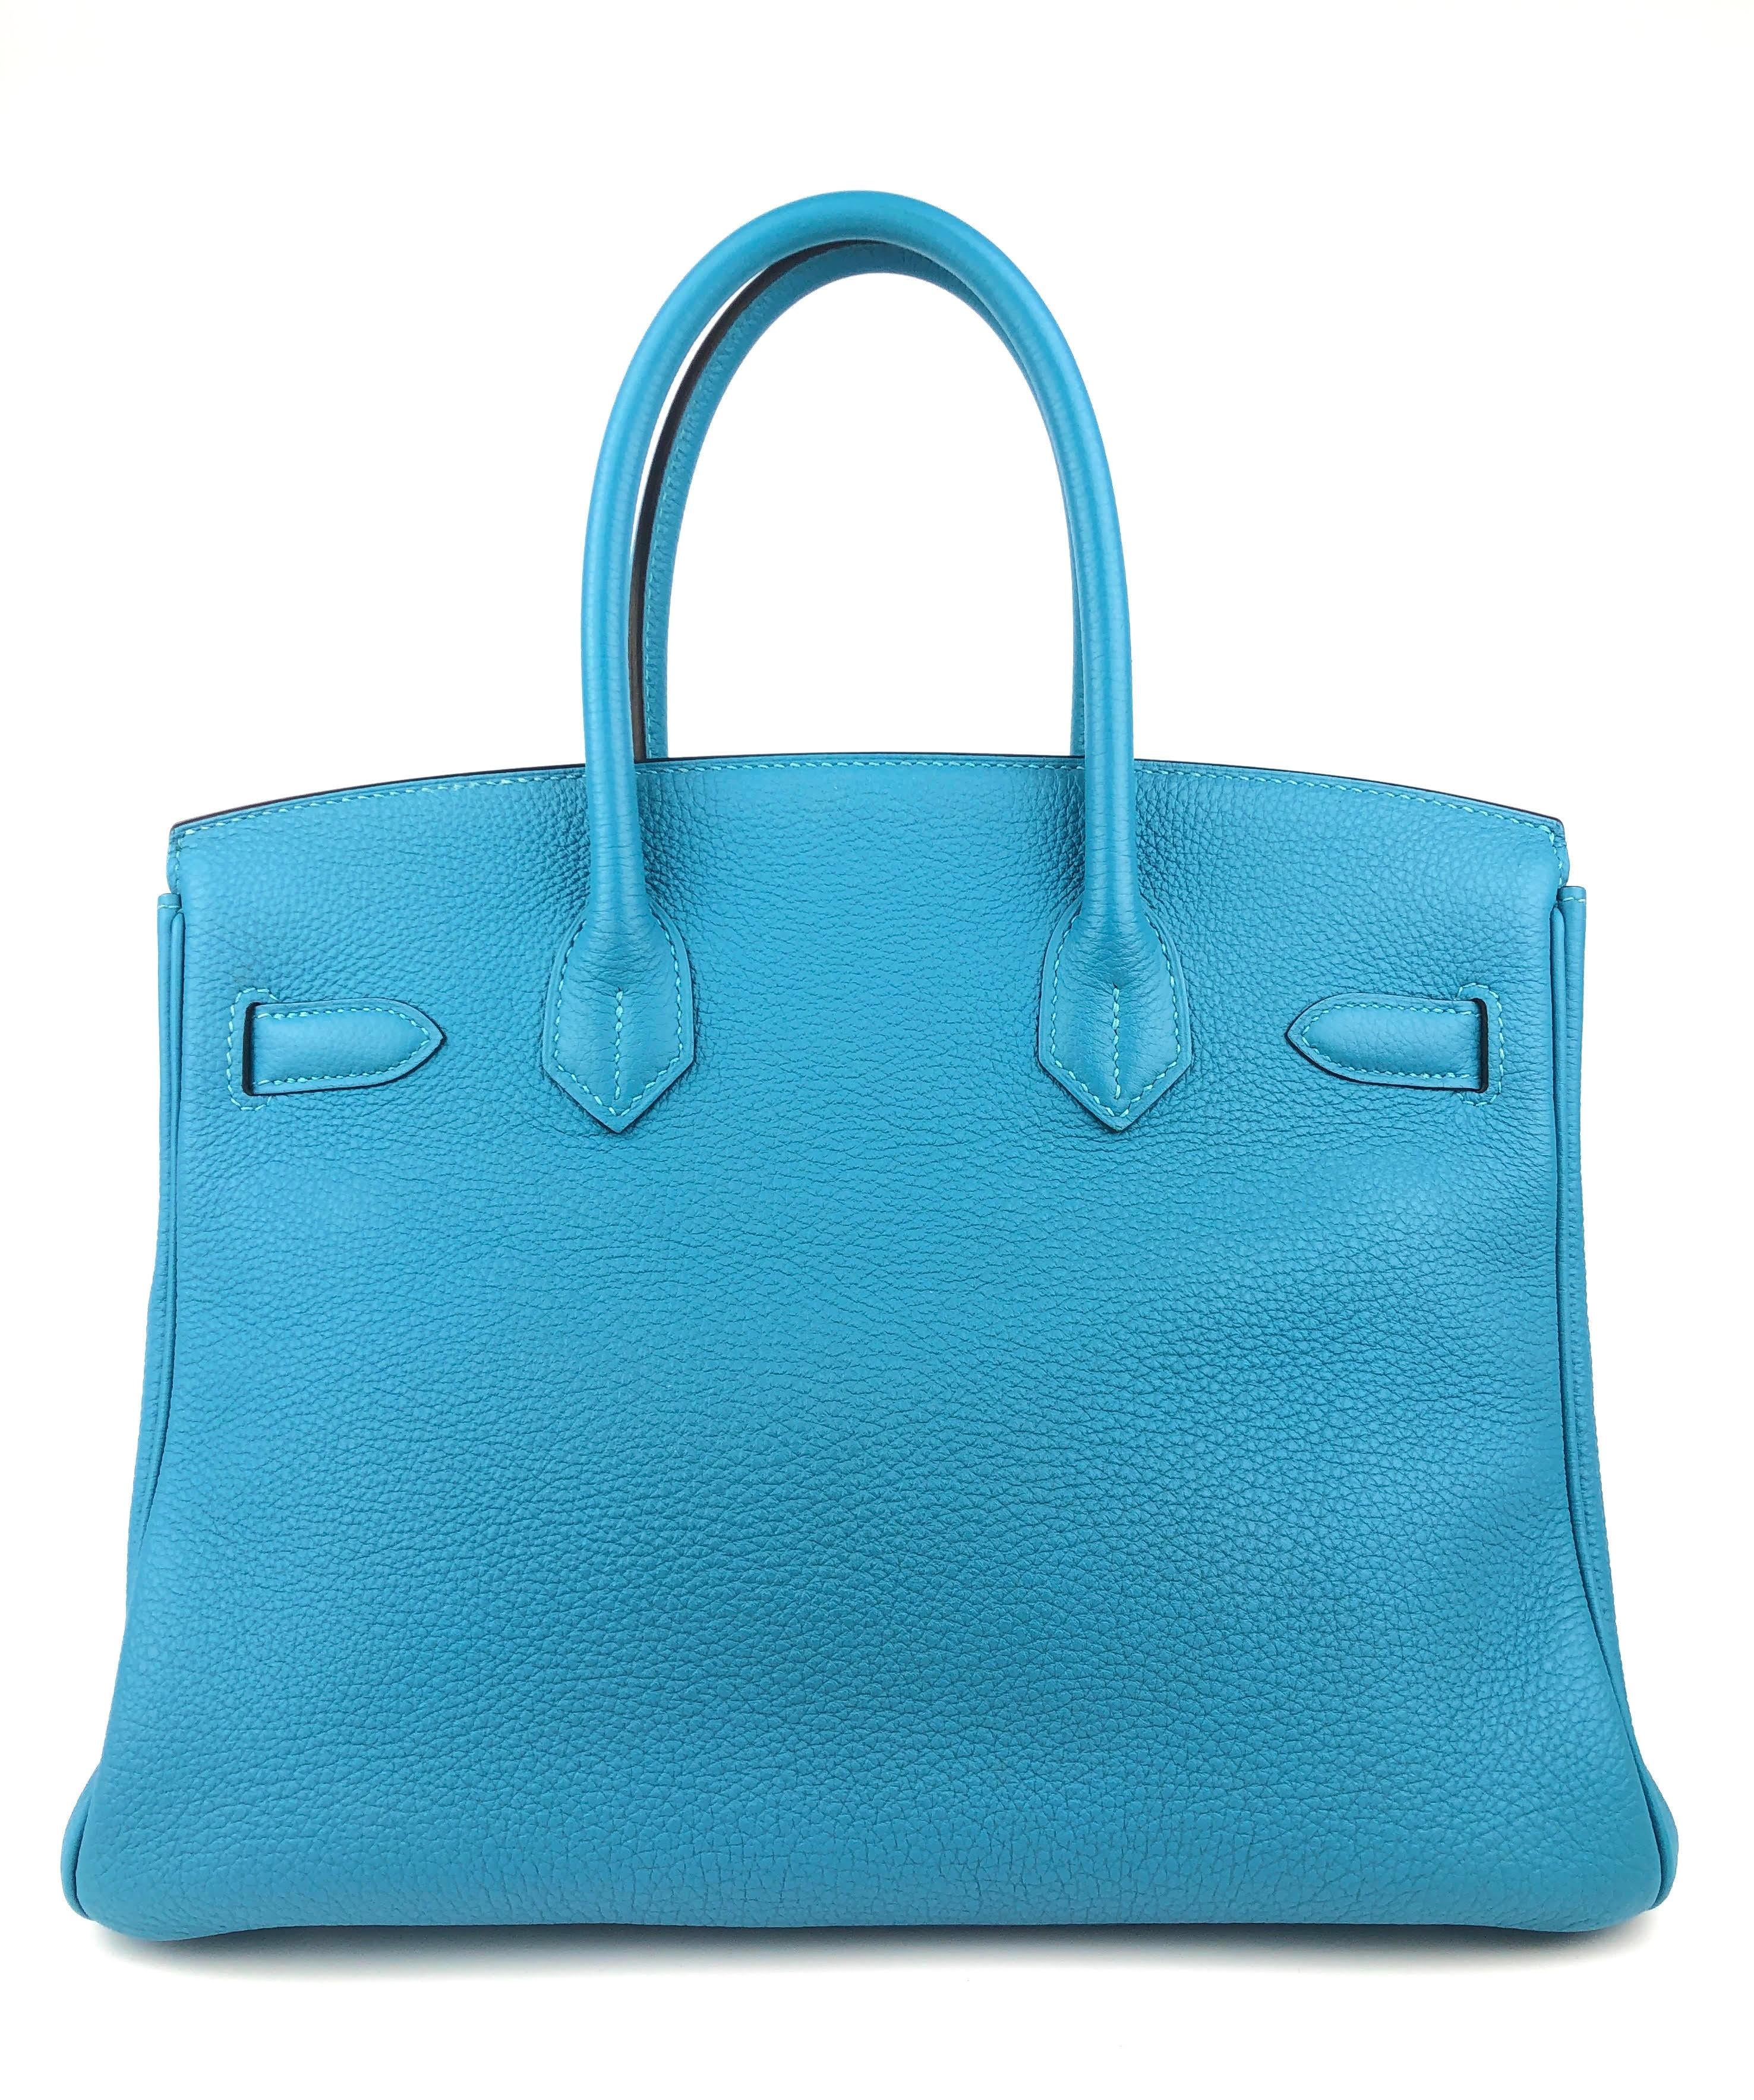 This authentic Hermès Turquoise Togo 30 cm Birkin is in pristine unworn condition with the protective plastic intact on the hardware.  Waitlists exceeding a year are commonplace for the intensely coveted classic leather Birkin bag.  Each piece is